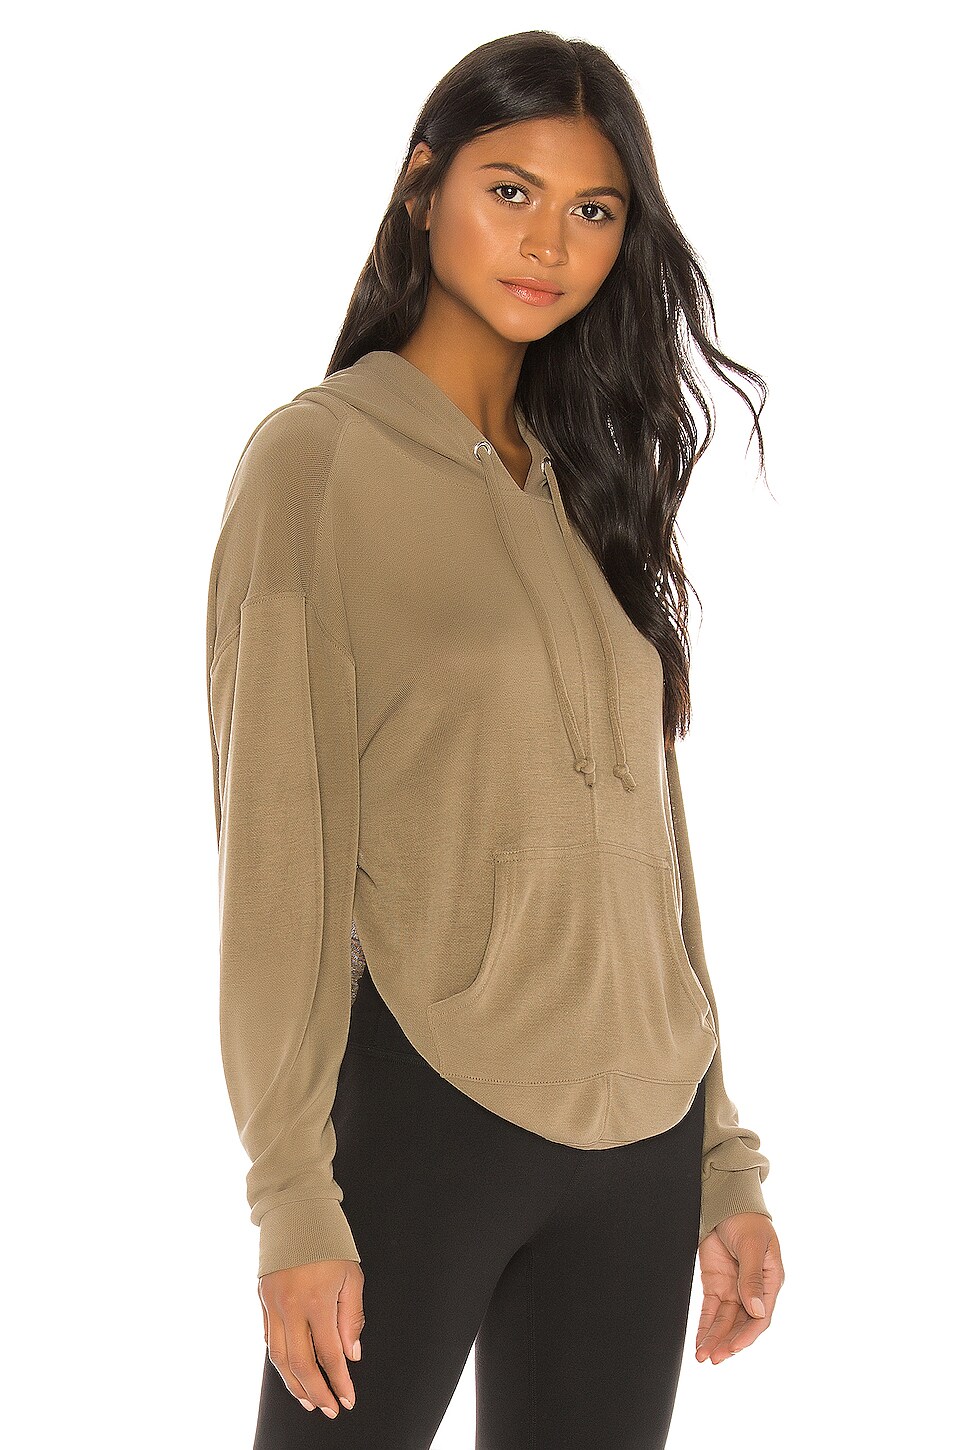 Free People X FP Movement Back Into It Hoodie in Army | REVOLVE